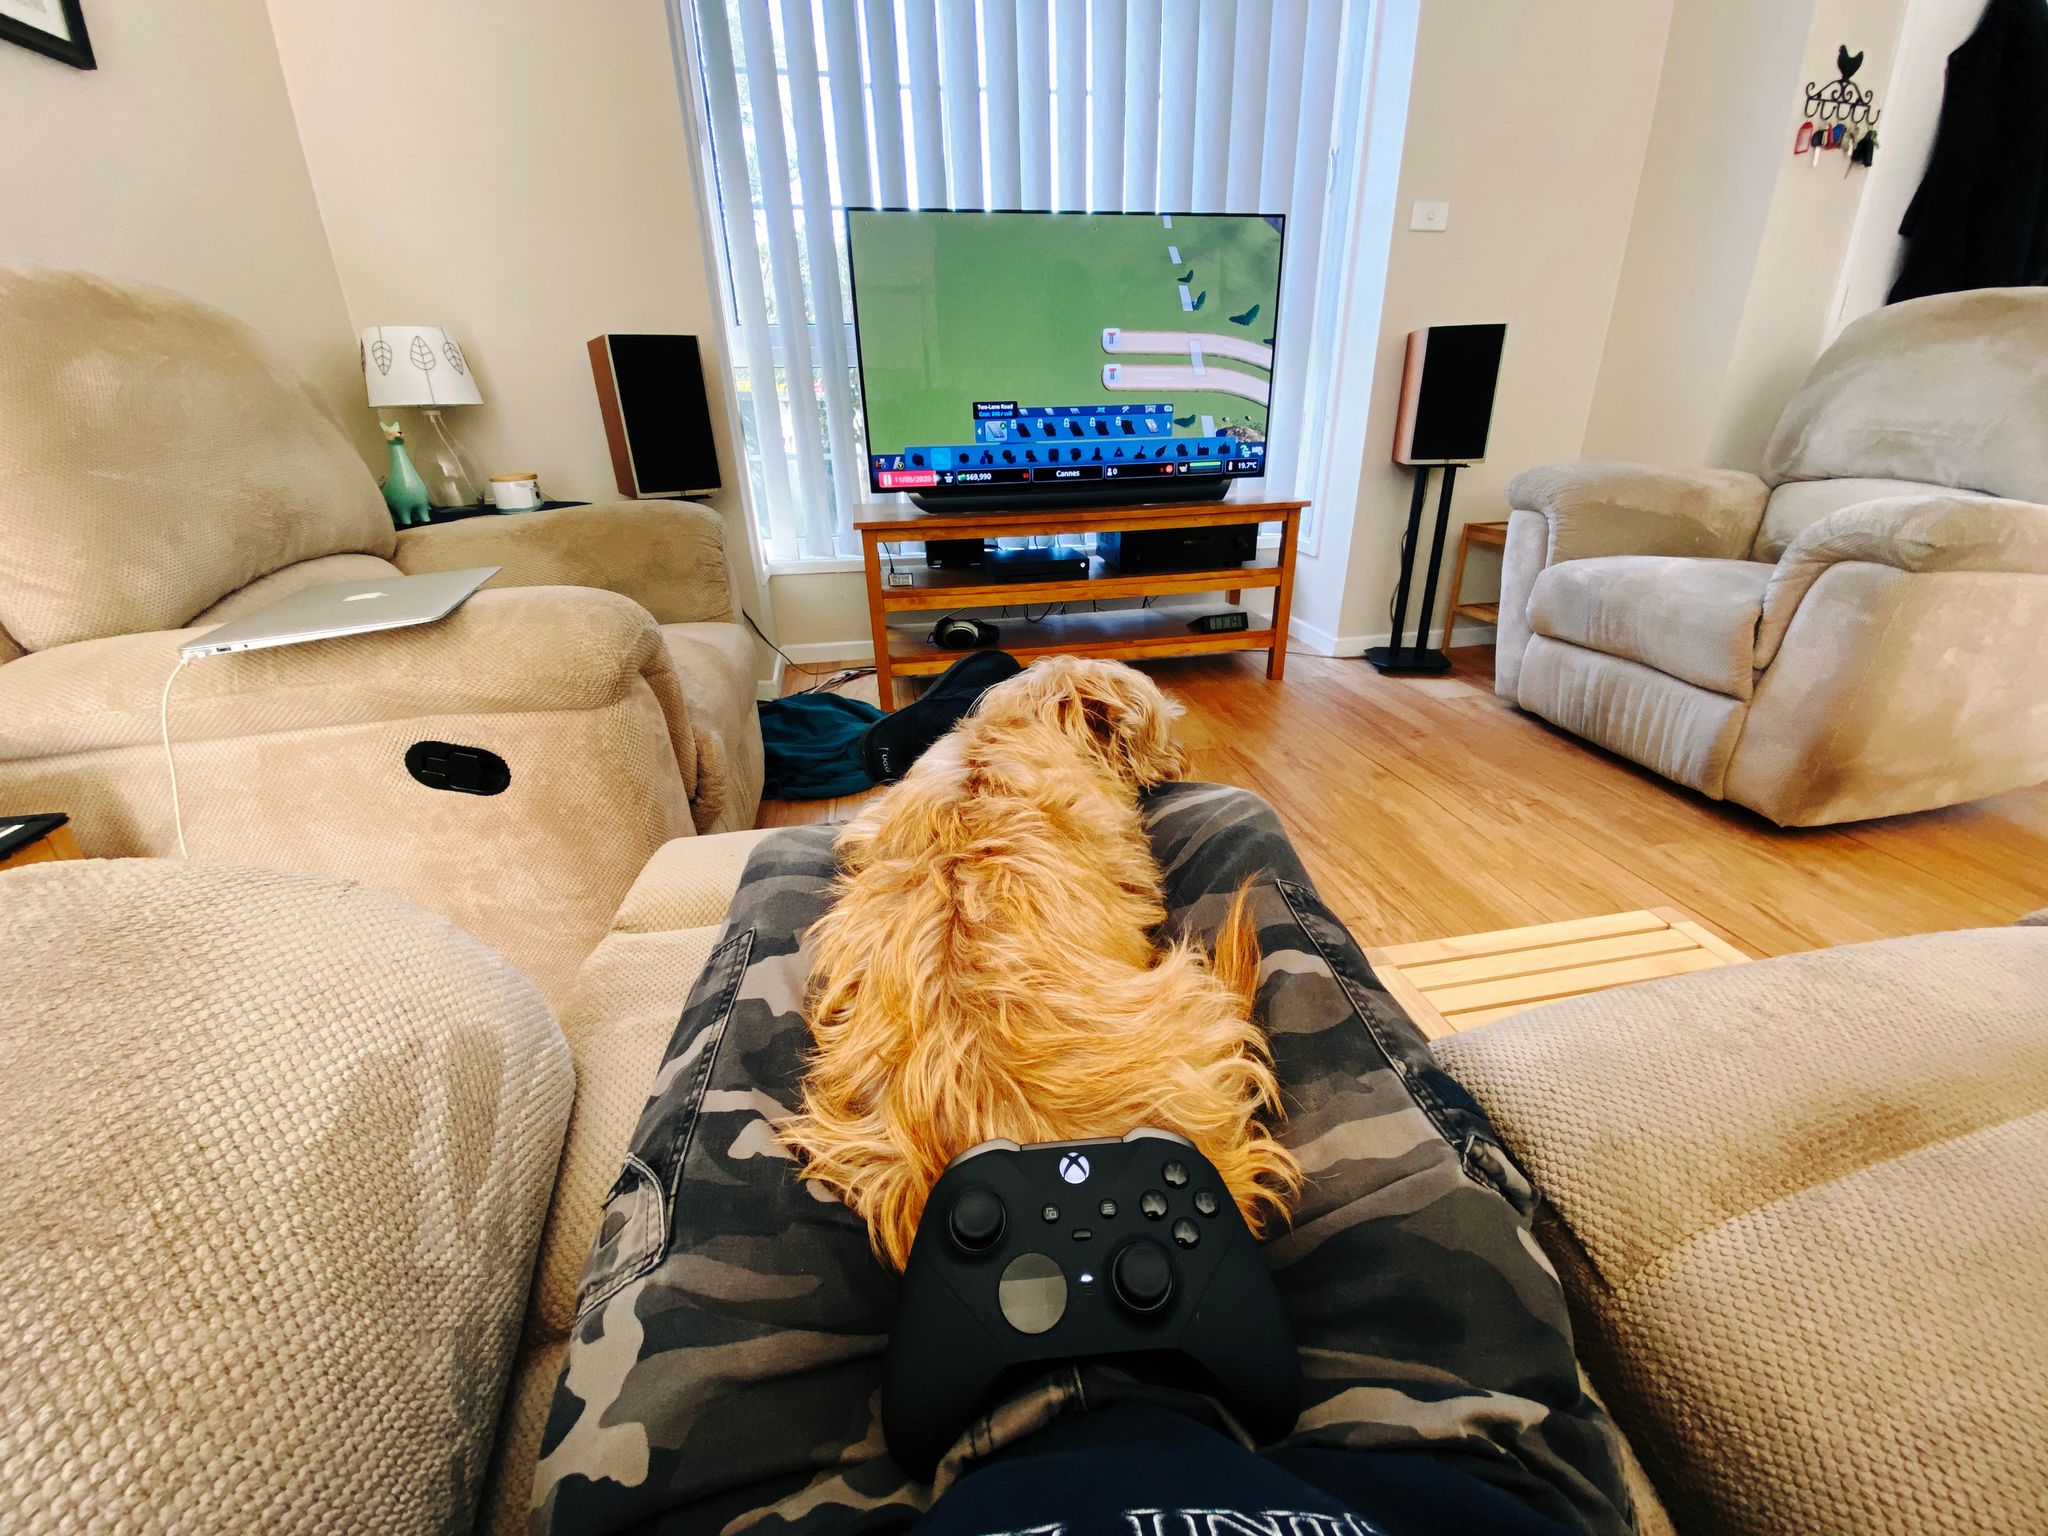 A photo taken from my perspective, I'm sitting on a recliner lounge with my feet up, a small blonde scruffy dog is lying on my legs, and an Xbox controller is sitting on the rear-end of the dog. I'm facing a TV that's on and showing the very start of a city in Cities: Skylines, with the two high entrances and nothing else yet.